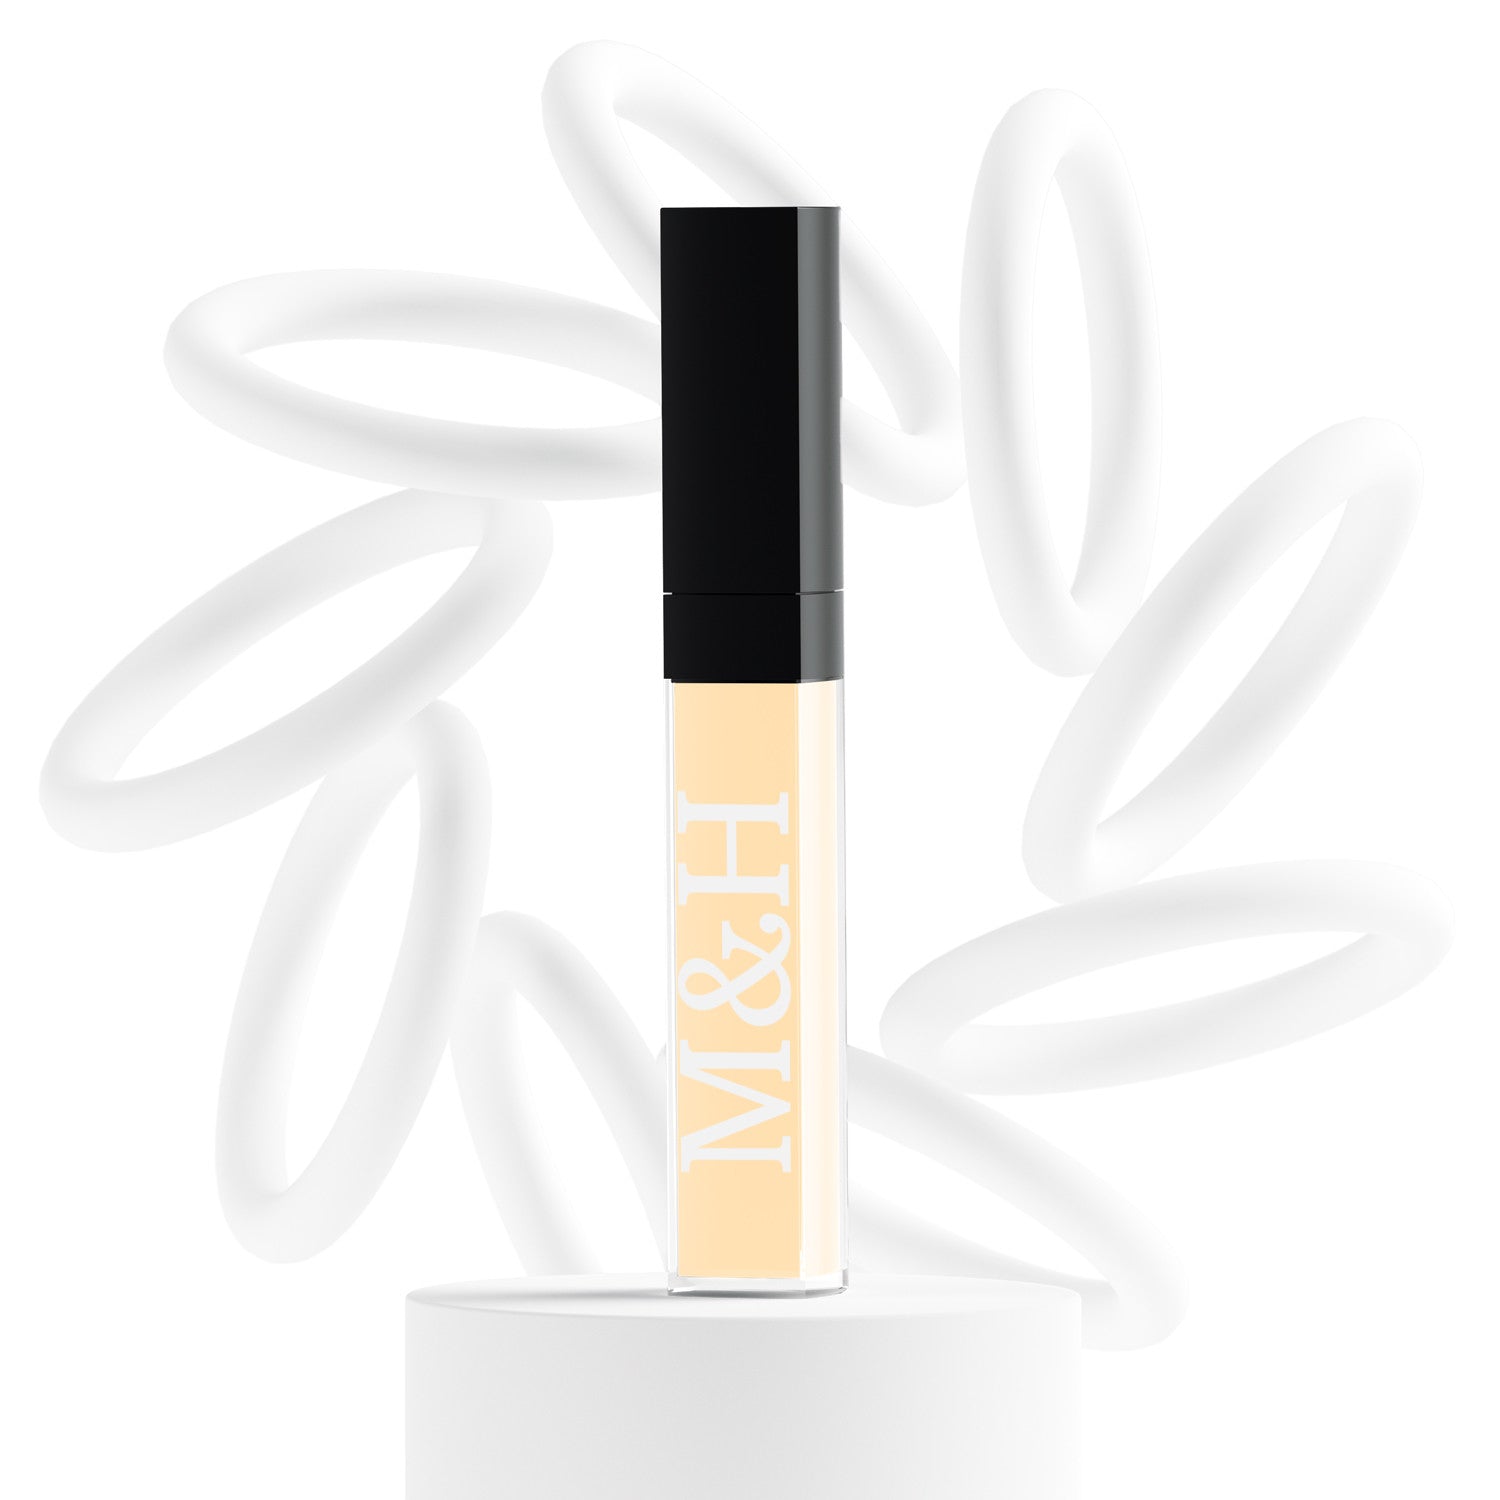 Vegan Concealers - M&H FashionVegan ConcealersconcealerM&H FashionM&H FashionConcealer-952Medium IvoryVegan ConcealersM&H FashionconcealerM&H Fashion This multifunctional concealer is designed to cover under-eye circles, complexion alterations, and major imperfections like scars, hyperpigmentation, burns, and tatVegan Concealers